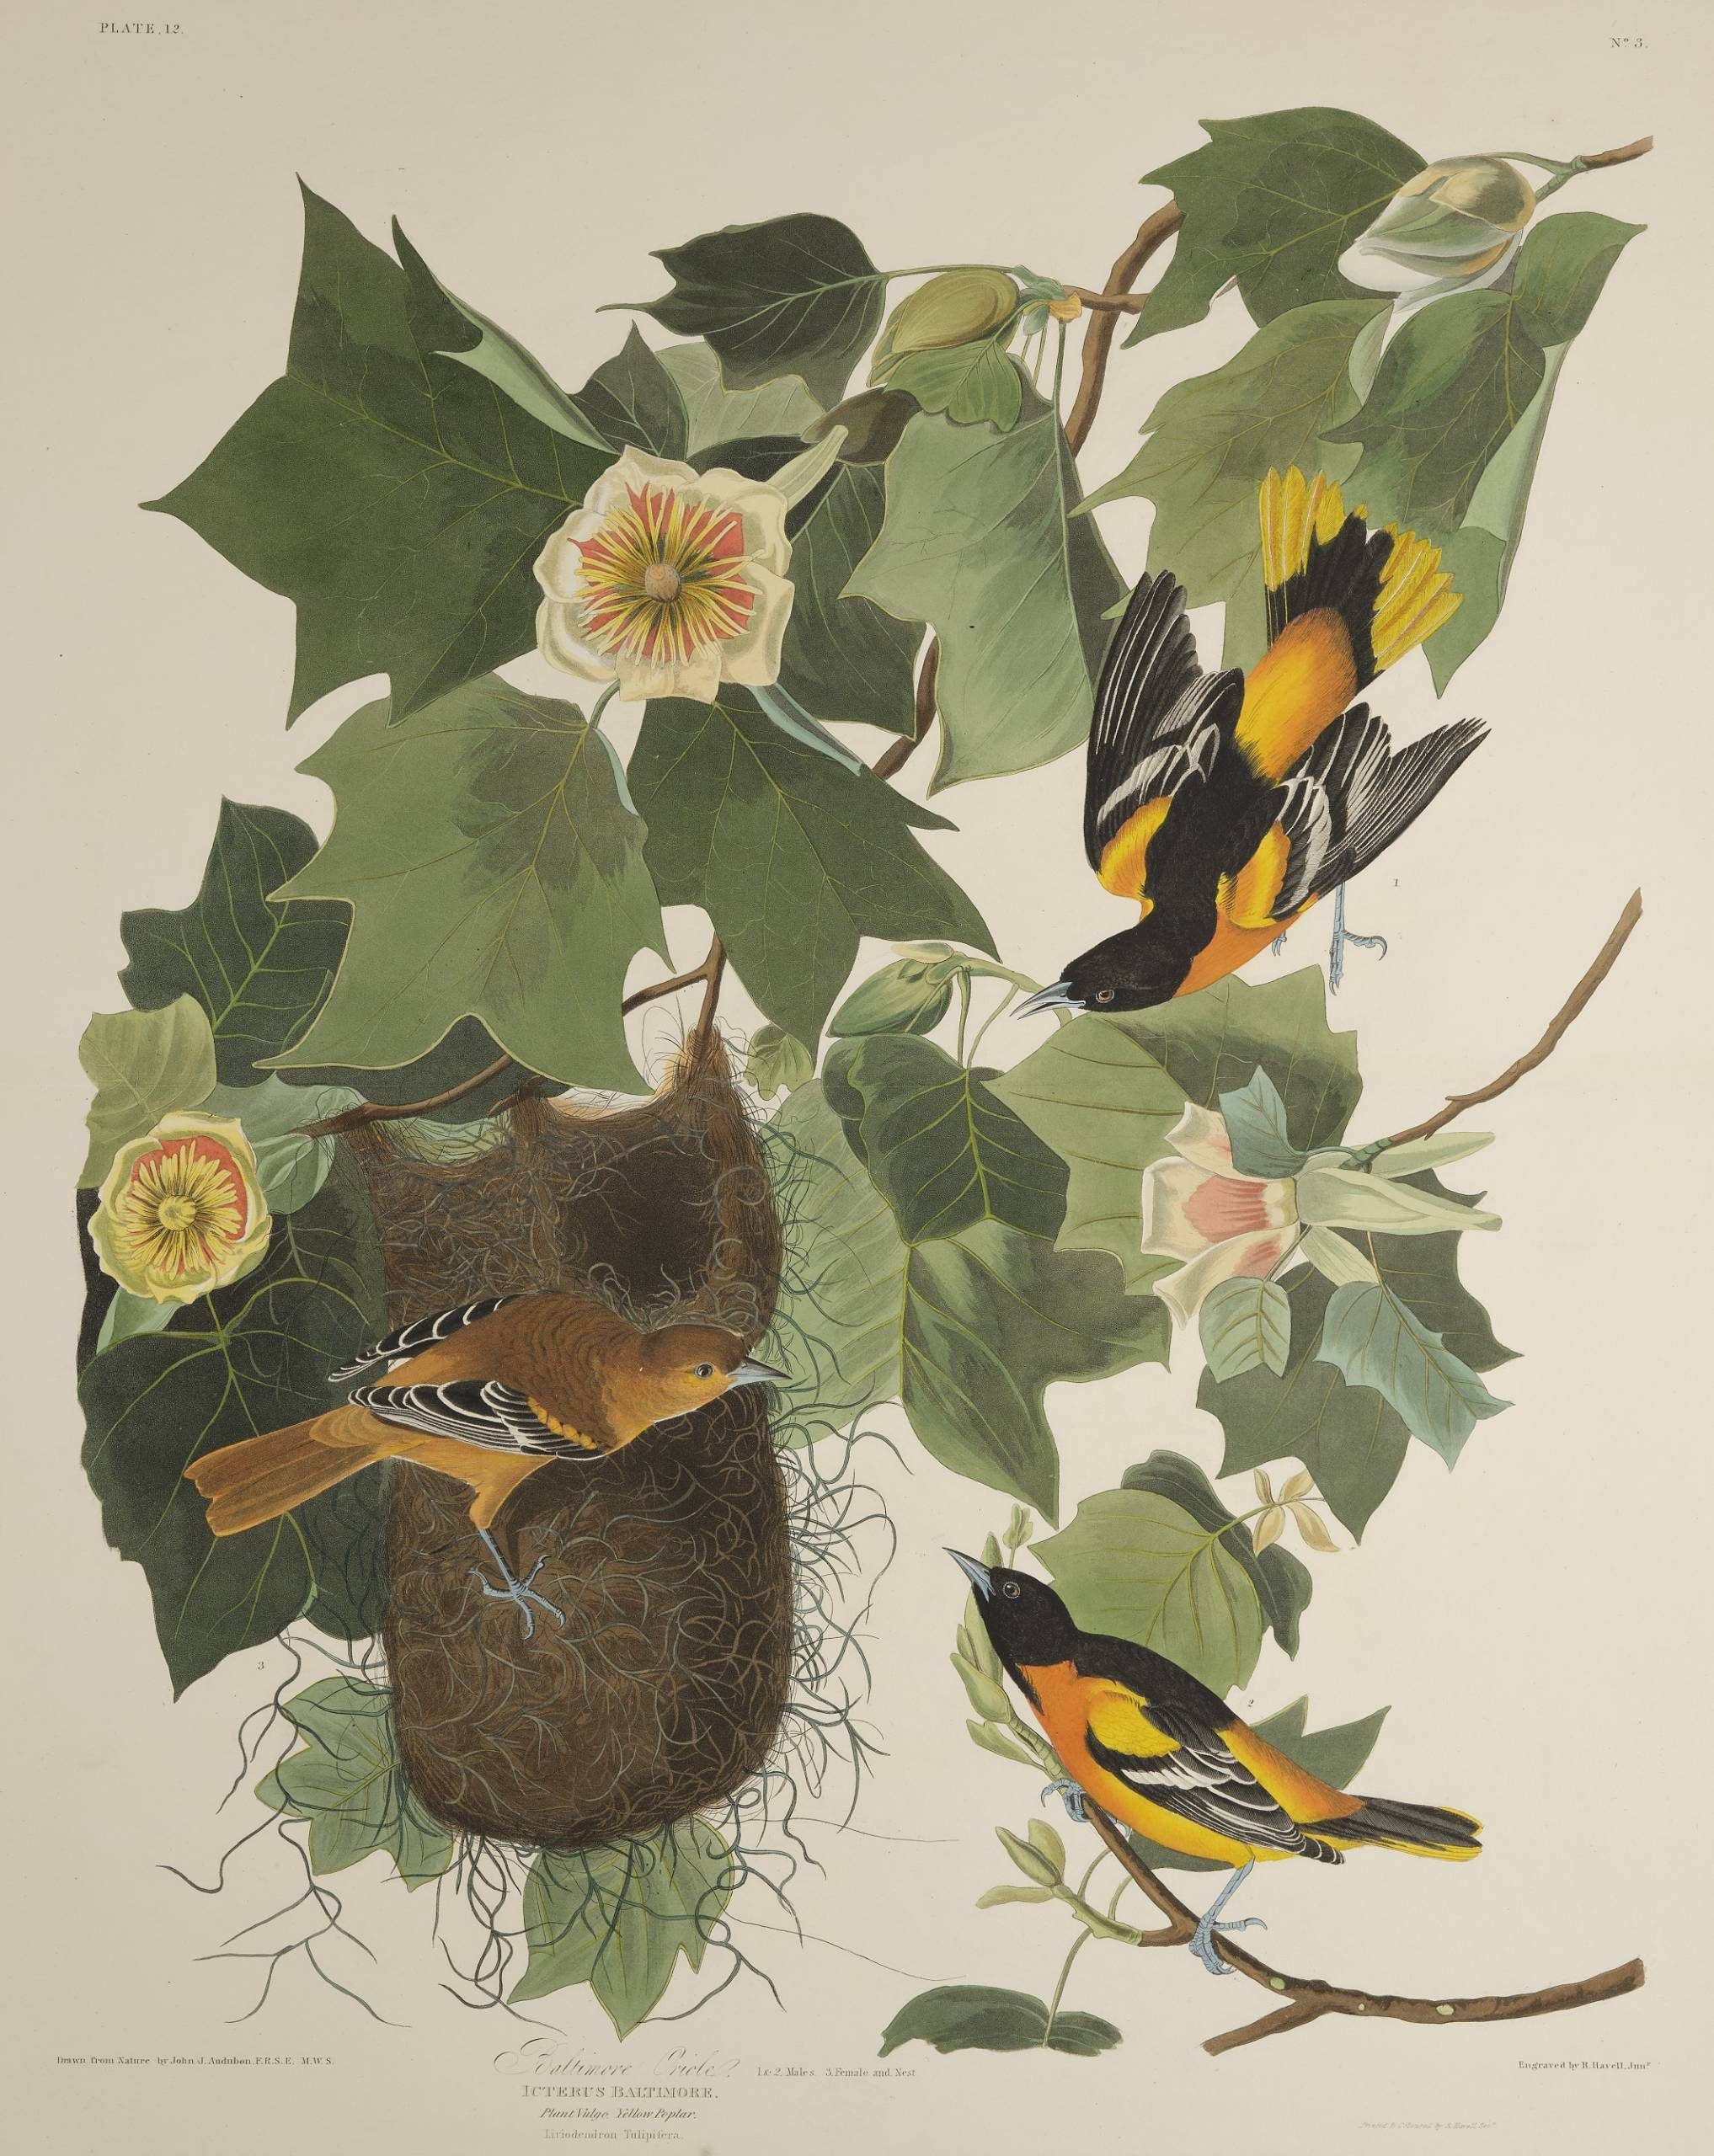 A vintage botanical illustration showing Baltimore oriole birds among flowering plants, including passion flowers, and their nest.